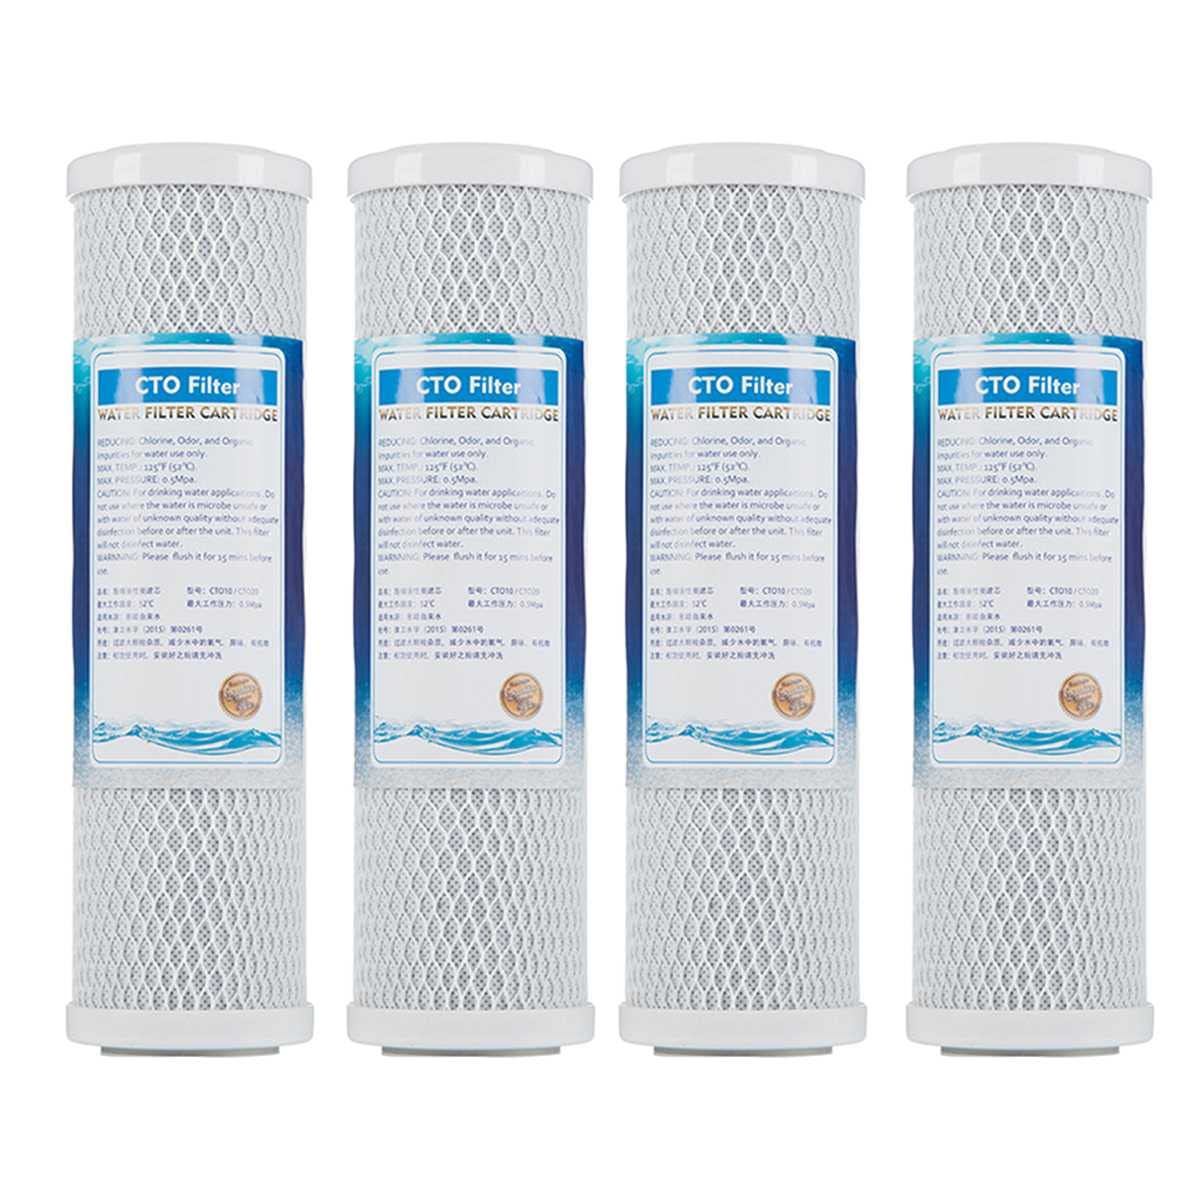 CTO Carbon Block Filters 10" x 2.5" Activated Carbon Block Carbon Filter (5 Micron) Compatible with Most 10" Standard Whole House Water Filtration Systems Under Sink